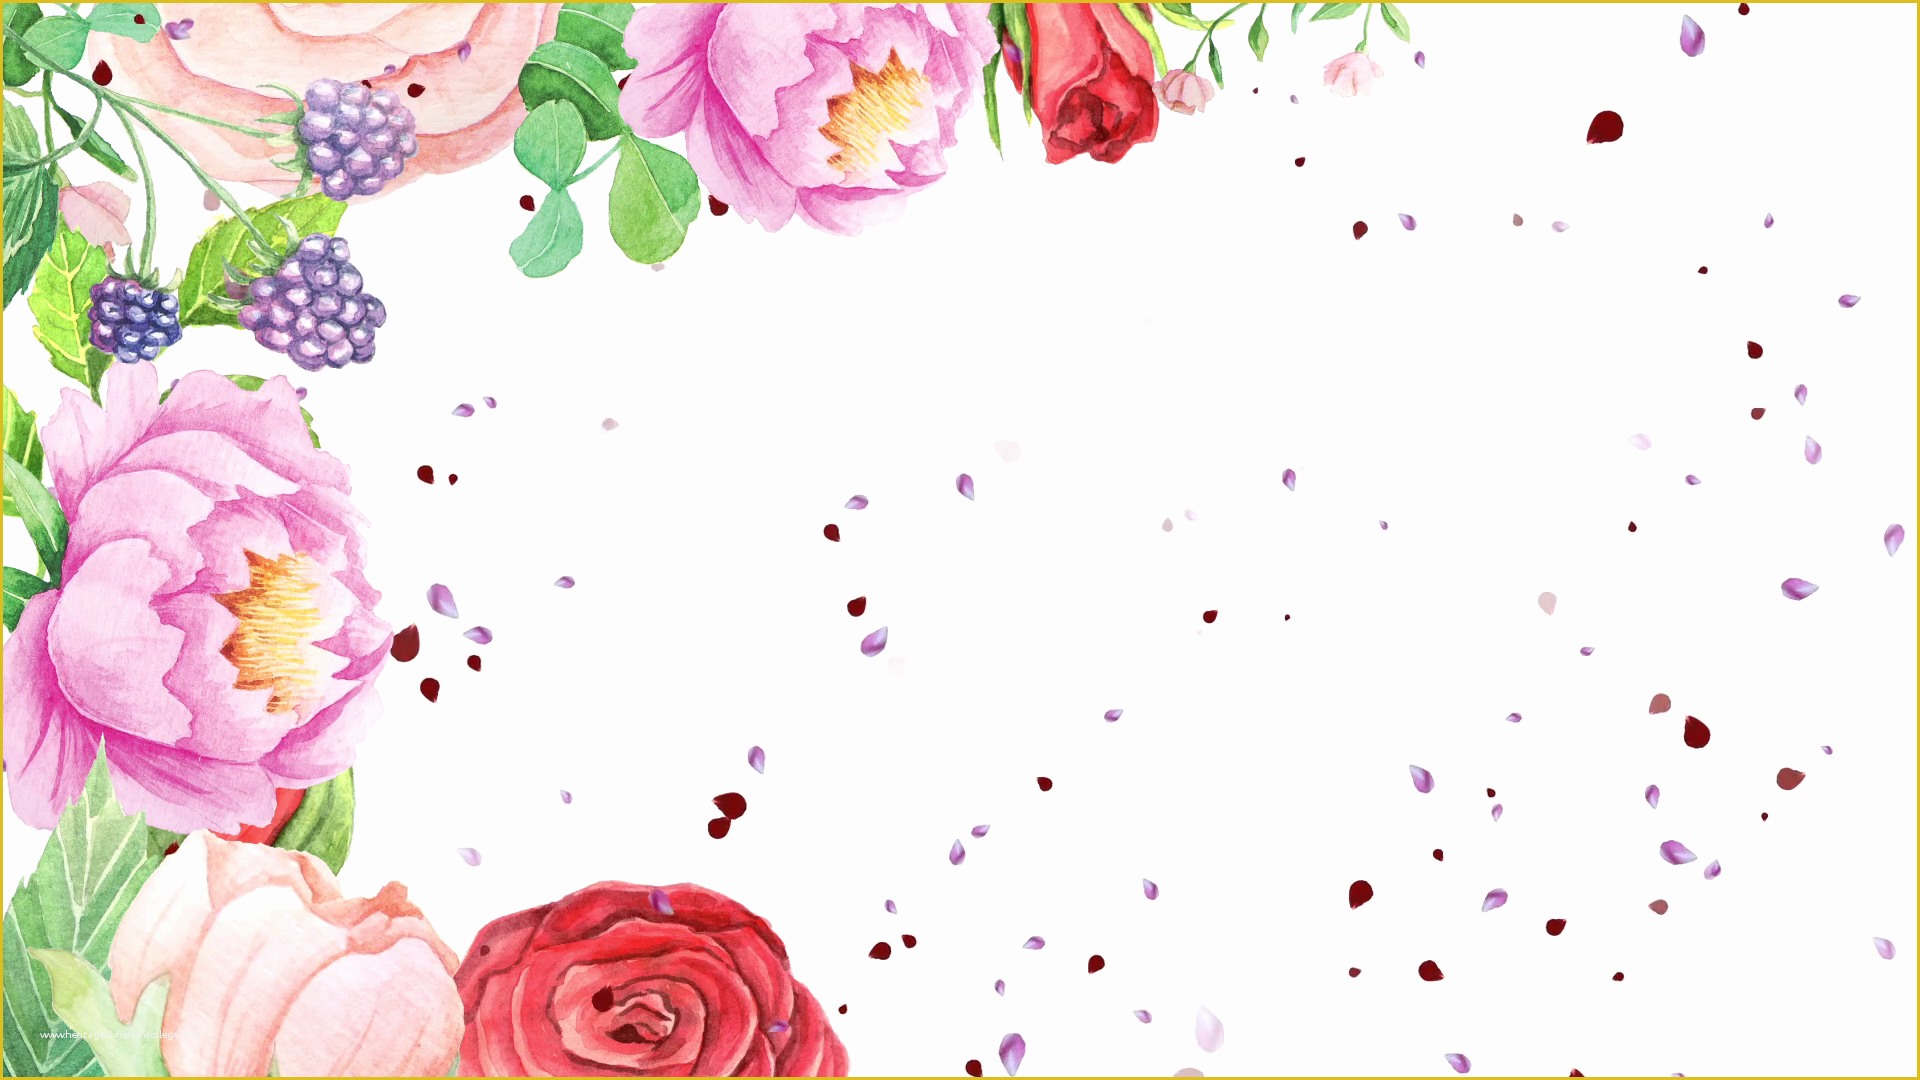 Falling Flower Petals after Effects Template Free Of Watercolor Flowers and Falling Petals Motion Background